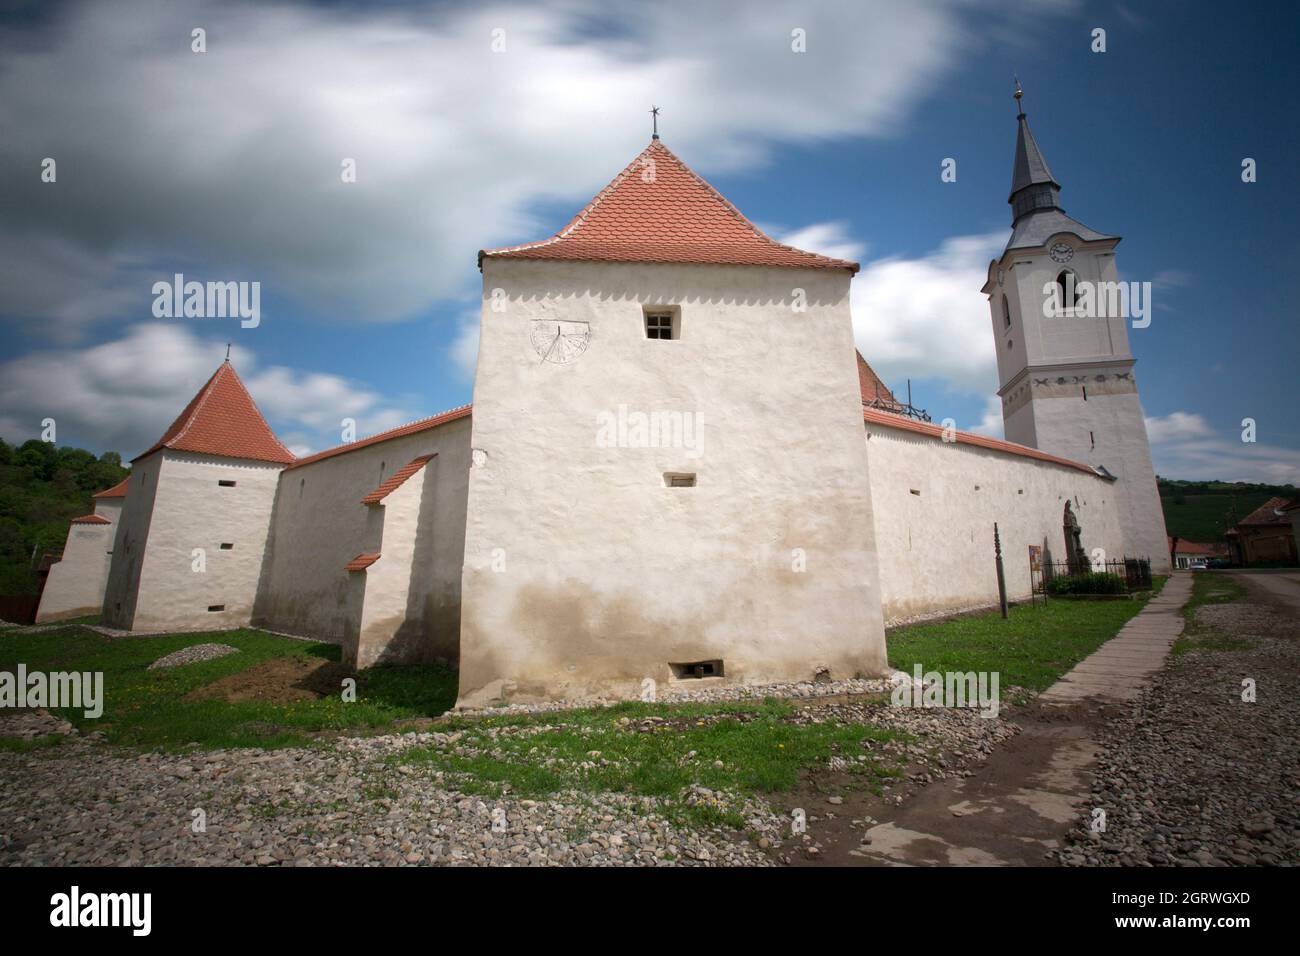 Fortified church of Darjiu a historical and architectural monument of XIII-XIV century, included in UNESCO list of world cultural heritage. Stock Photo